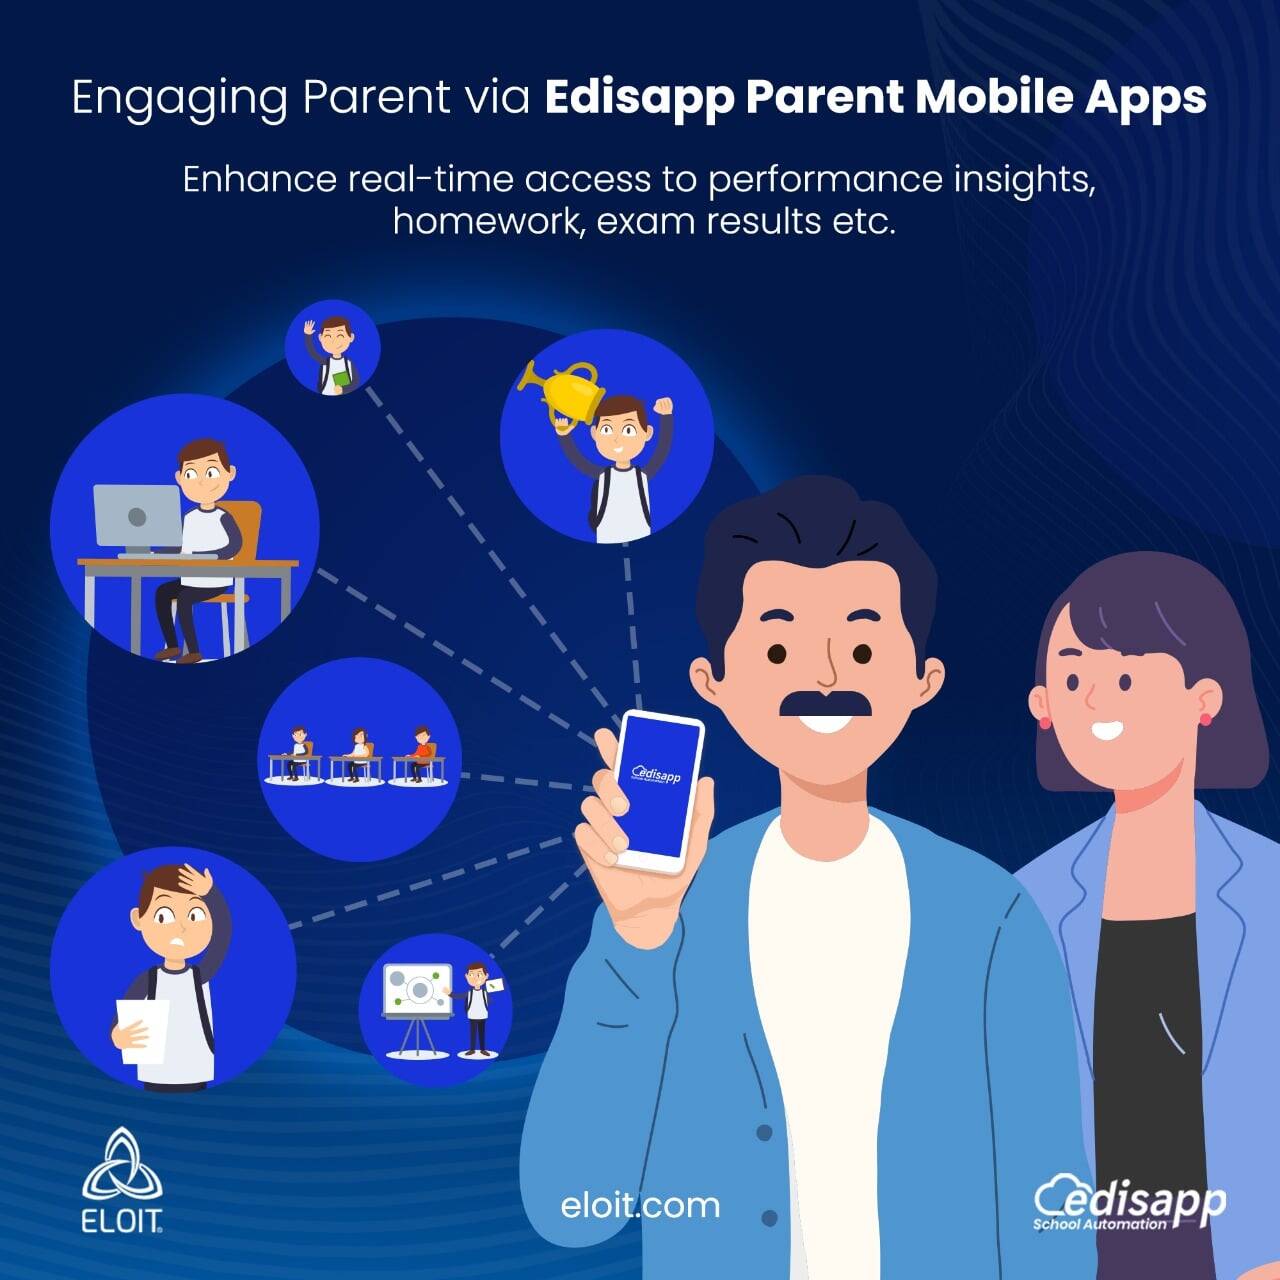 Top-rated features of Edisapp Parent App